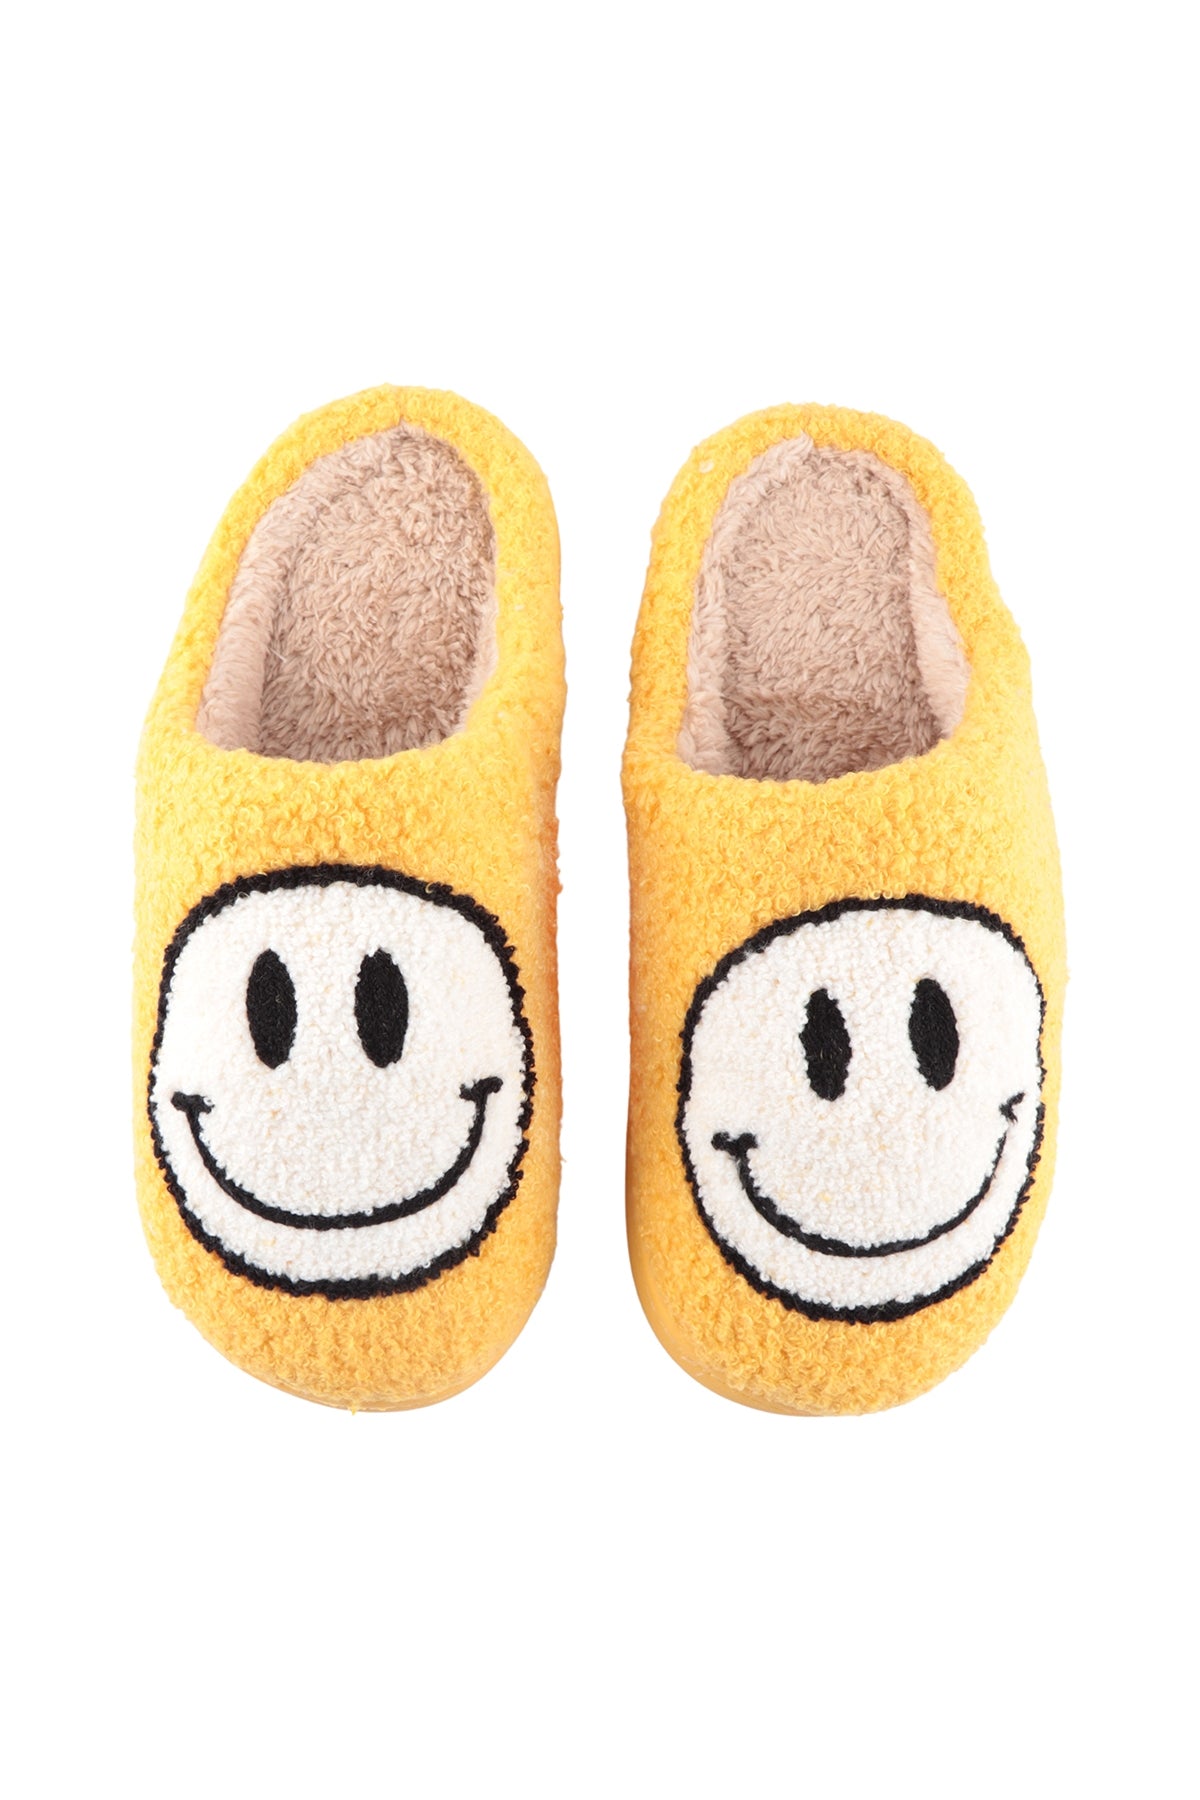 SMILEY FACE FUZZY FLEECE SOFT SLIPPER ASSORTED SIZE-YELLOW/6PCS (S2-M2-L2)